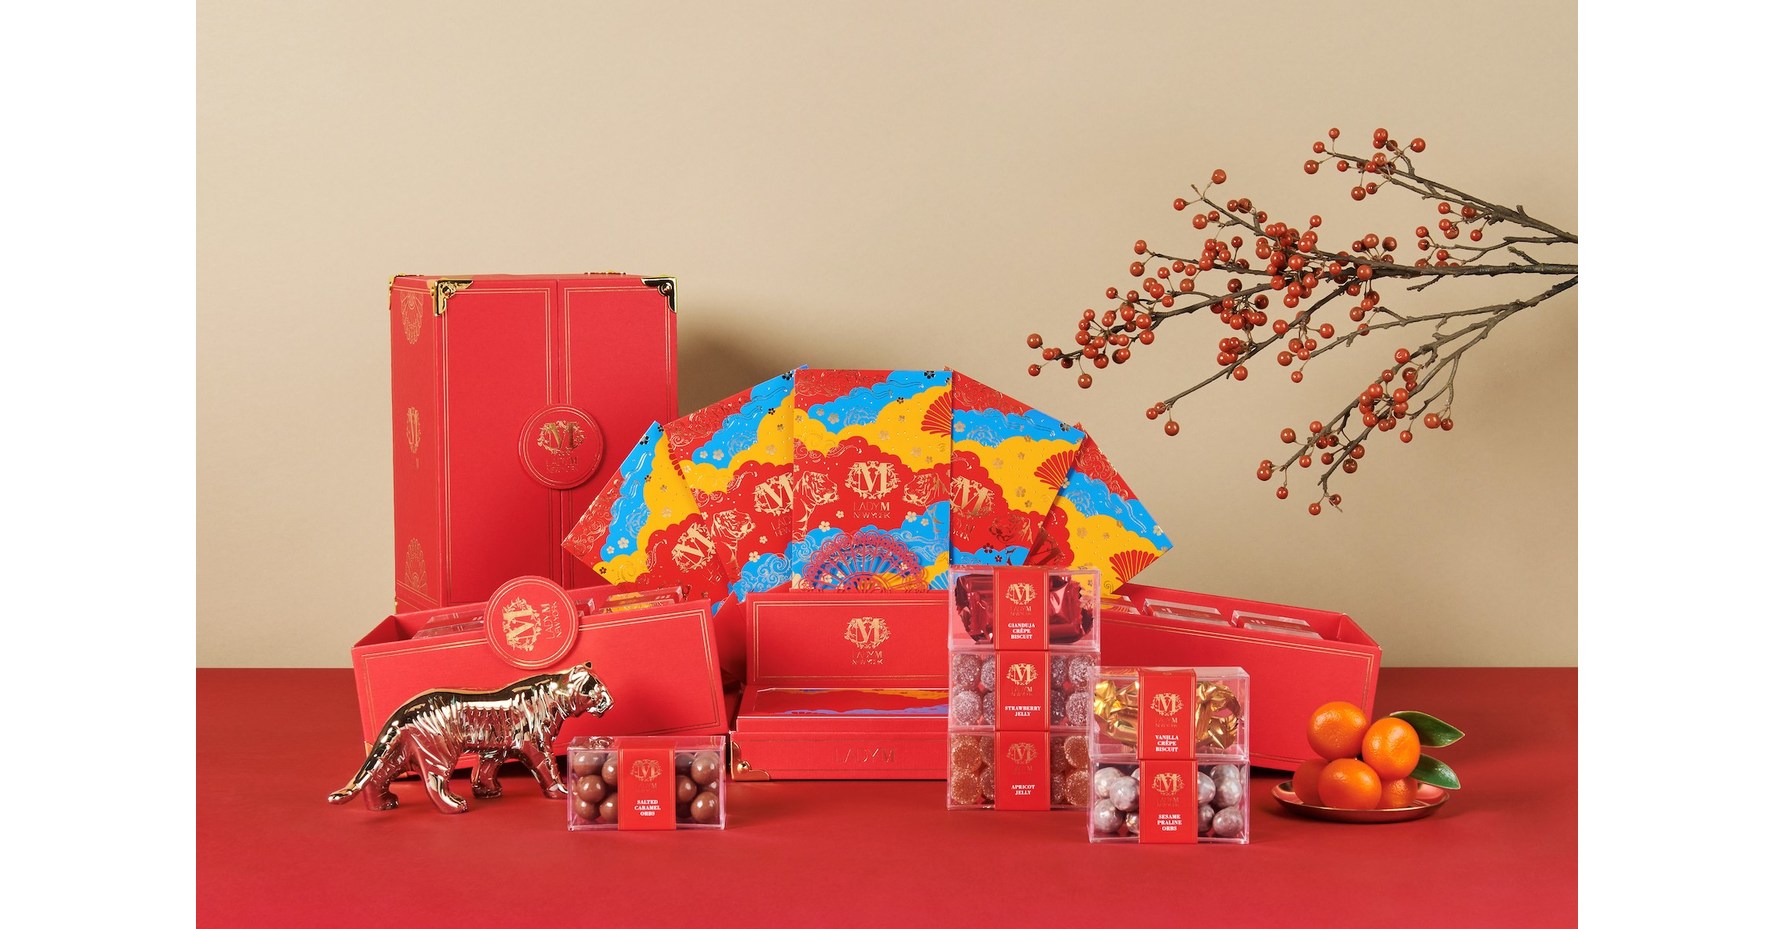 Chinese New Year 'Red Envelopes' Get Luxe-Label Treatment